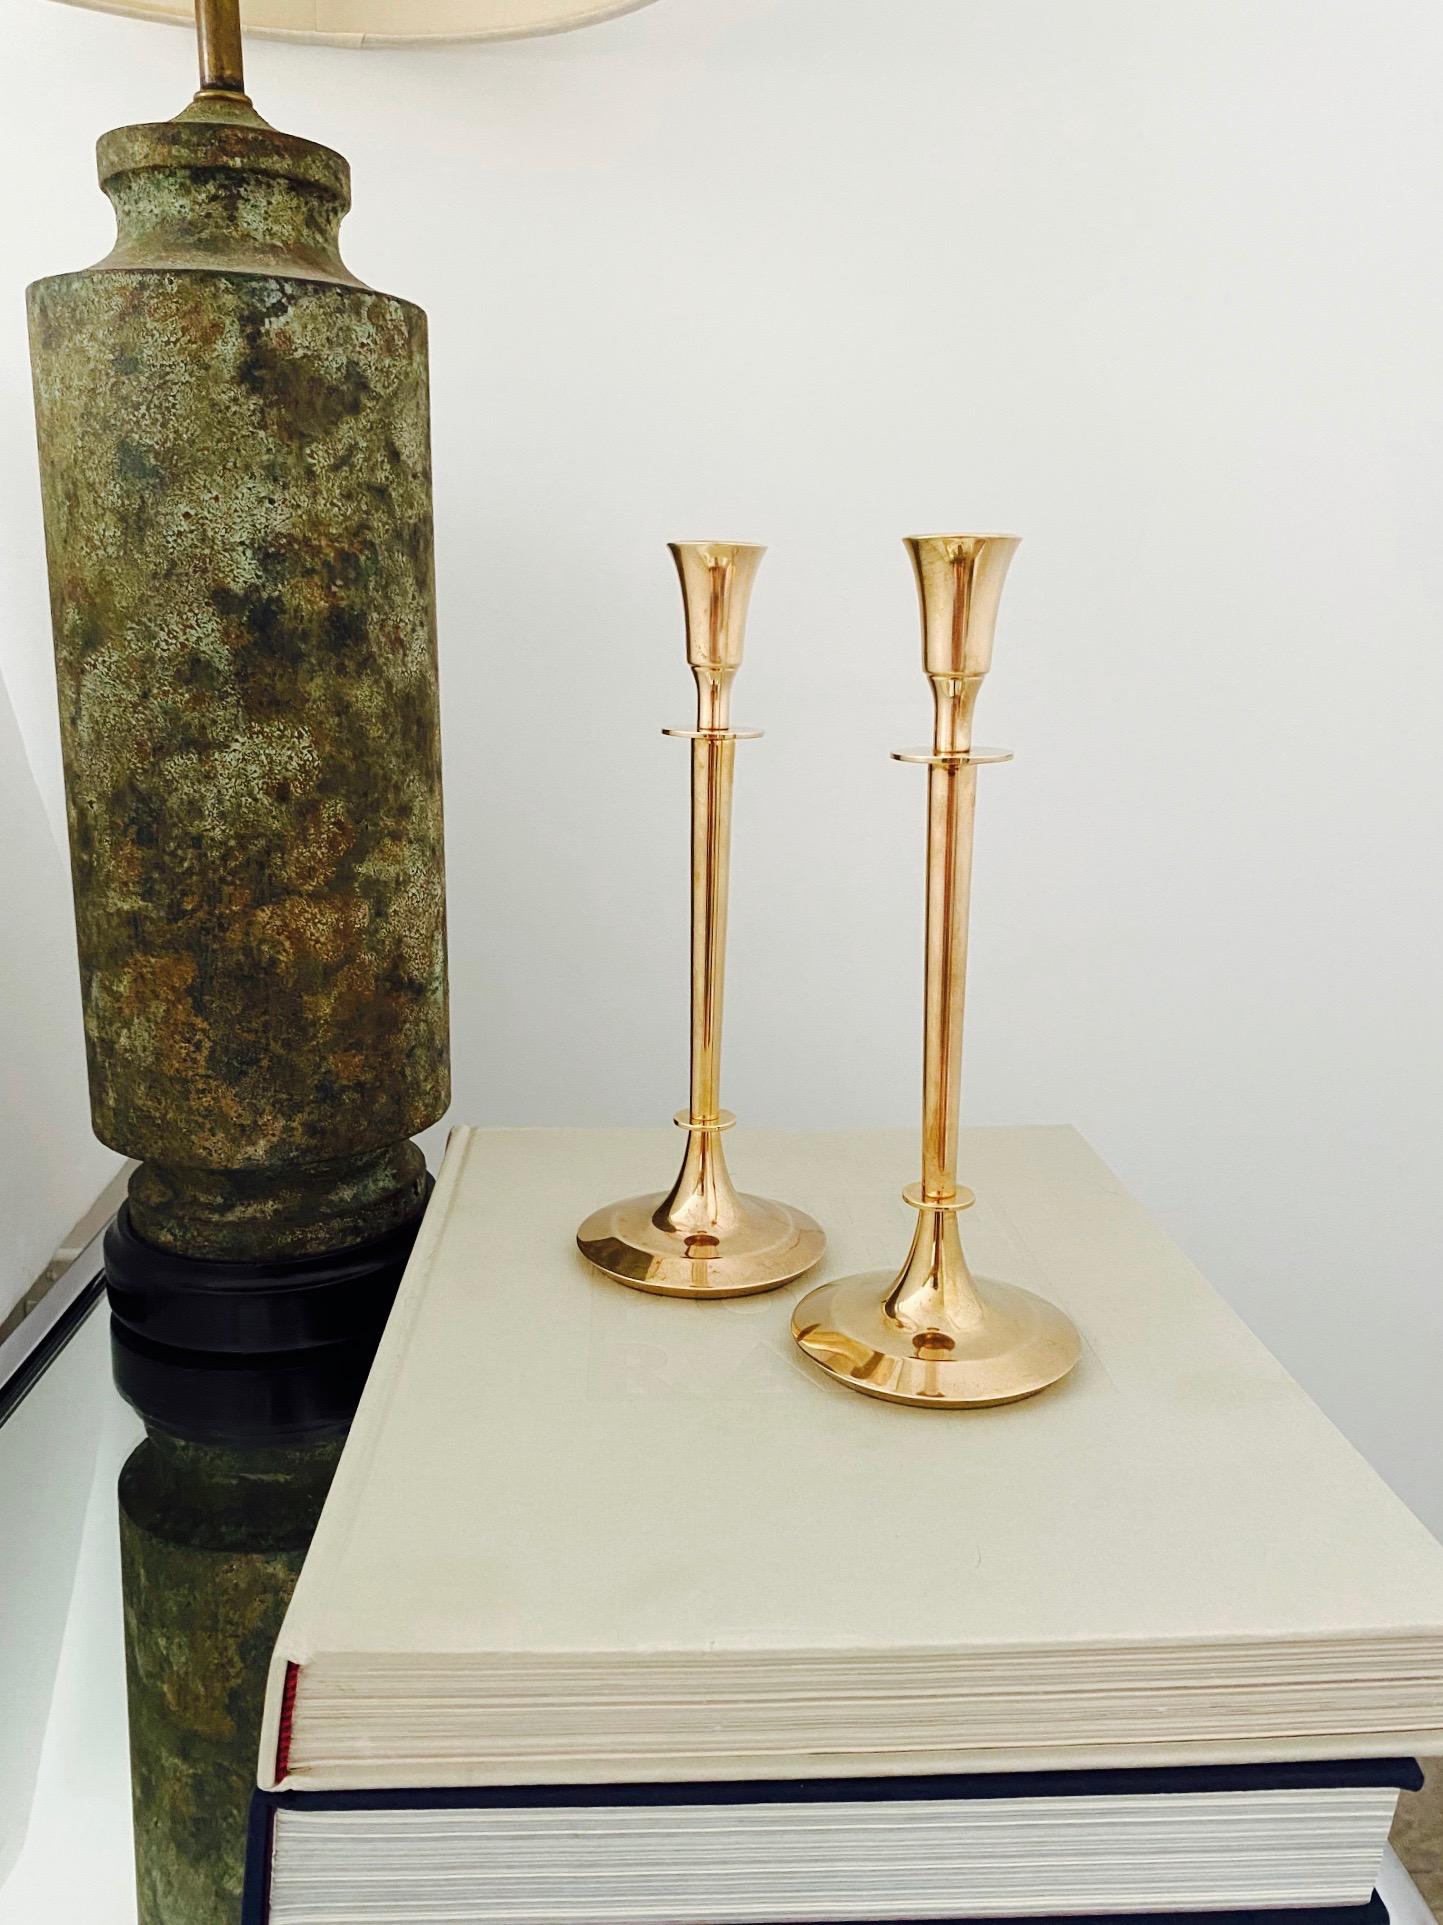 Pair of Swedish Mid-Century Modern candle holders cast in solid brass. The candlesticks have chic narrow stems with minimalist forms. The circular bases are tapered with beveled edges. Makes a beautiful addition to any tableware setting.